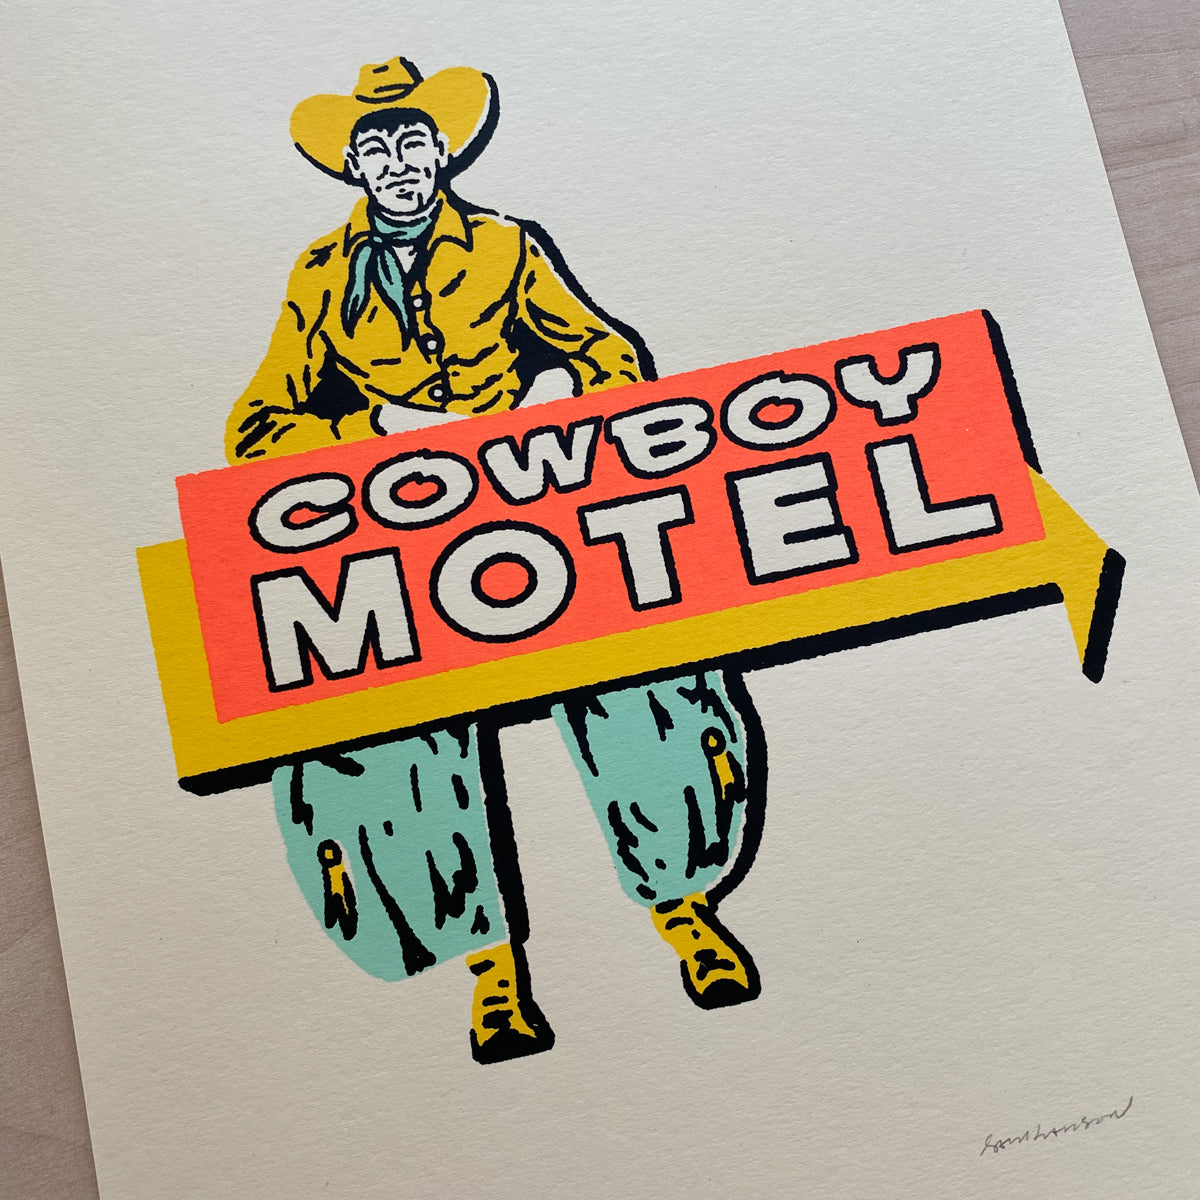 Cowboy Motel - Signed 8x10in Print #354